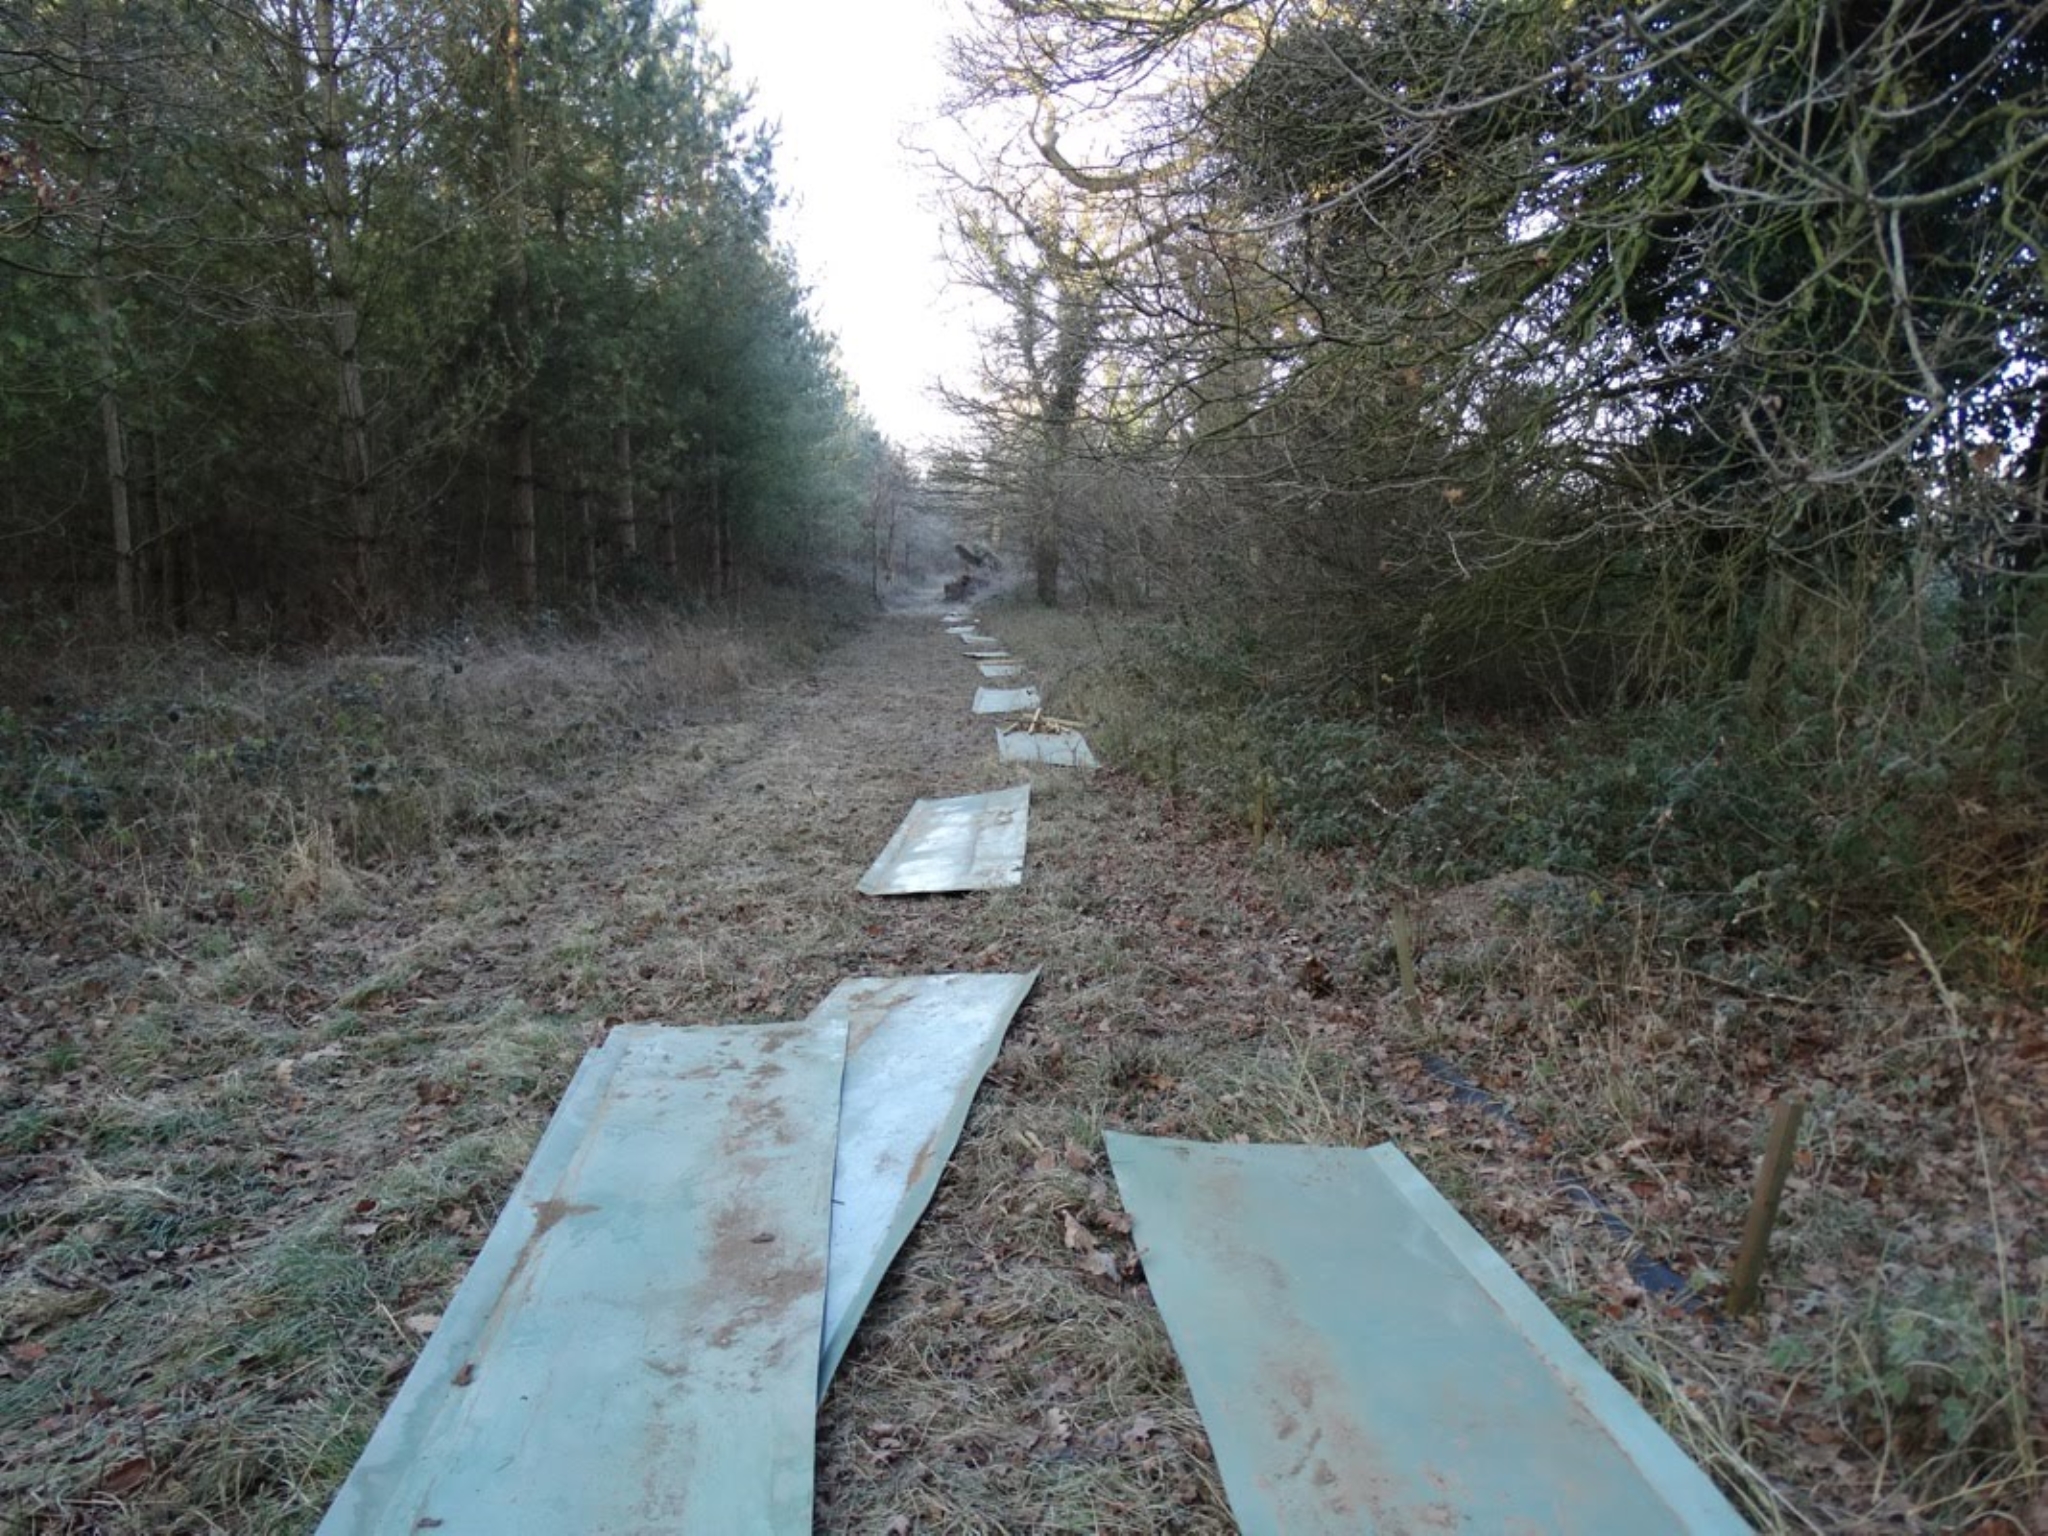 A photo from the FoTF Conservation Event - January 2019 - Erecting the Toad Fence at Cranwich : Sections of the fence lie on the ground prior to beig assembled